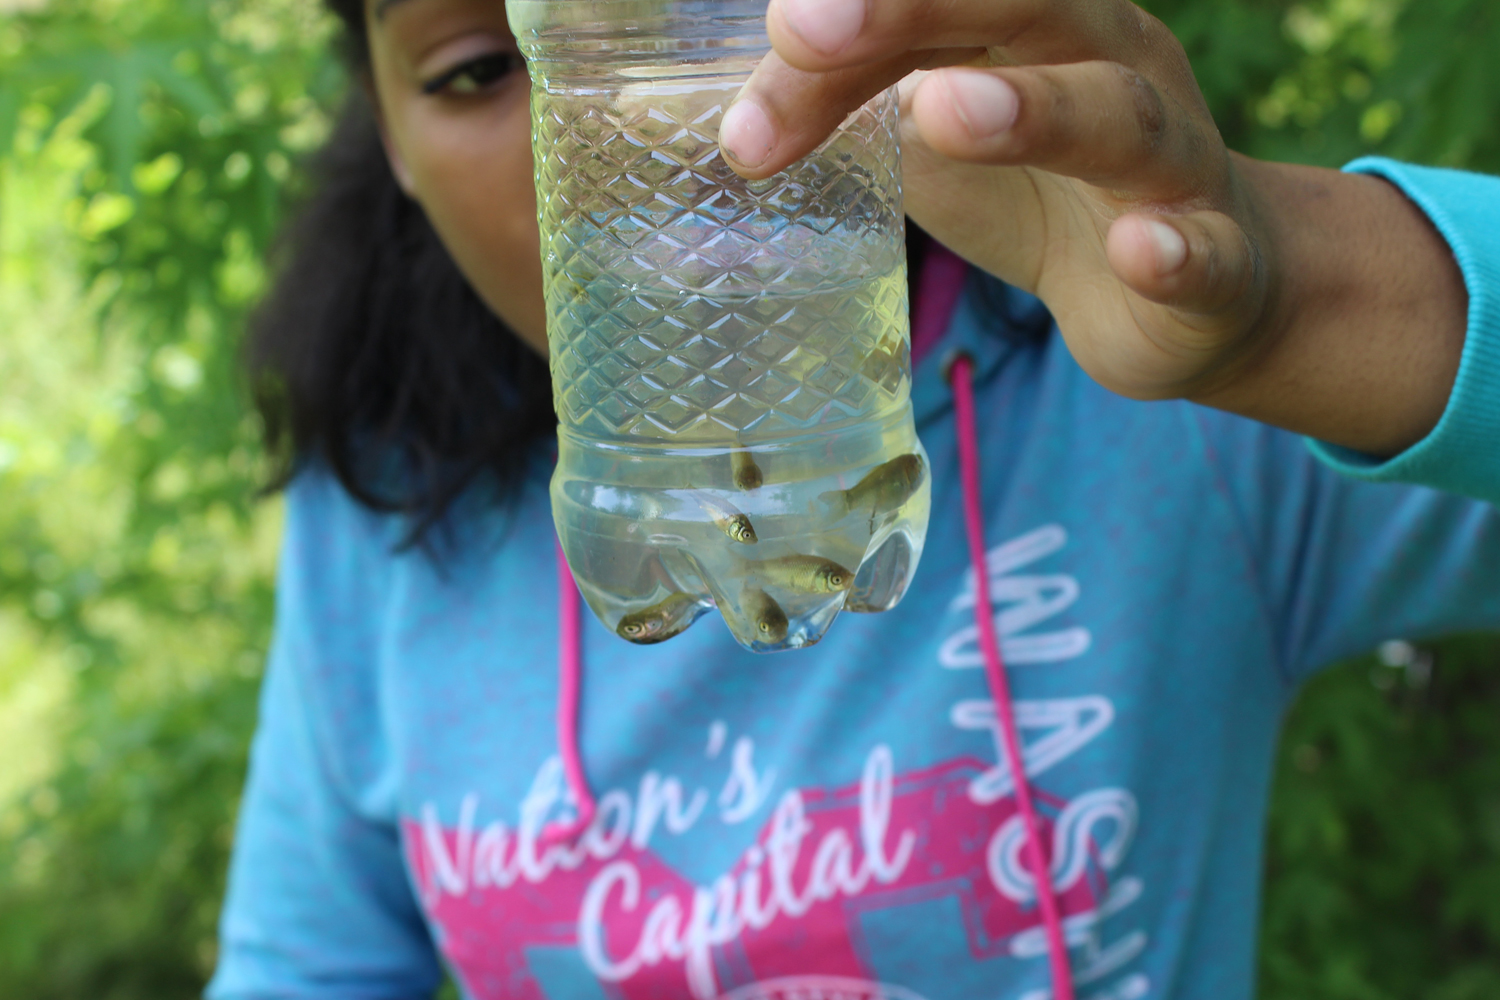 A student contributes another species to the total count. (Photo courtesy of Sydney Clements)